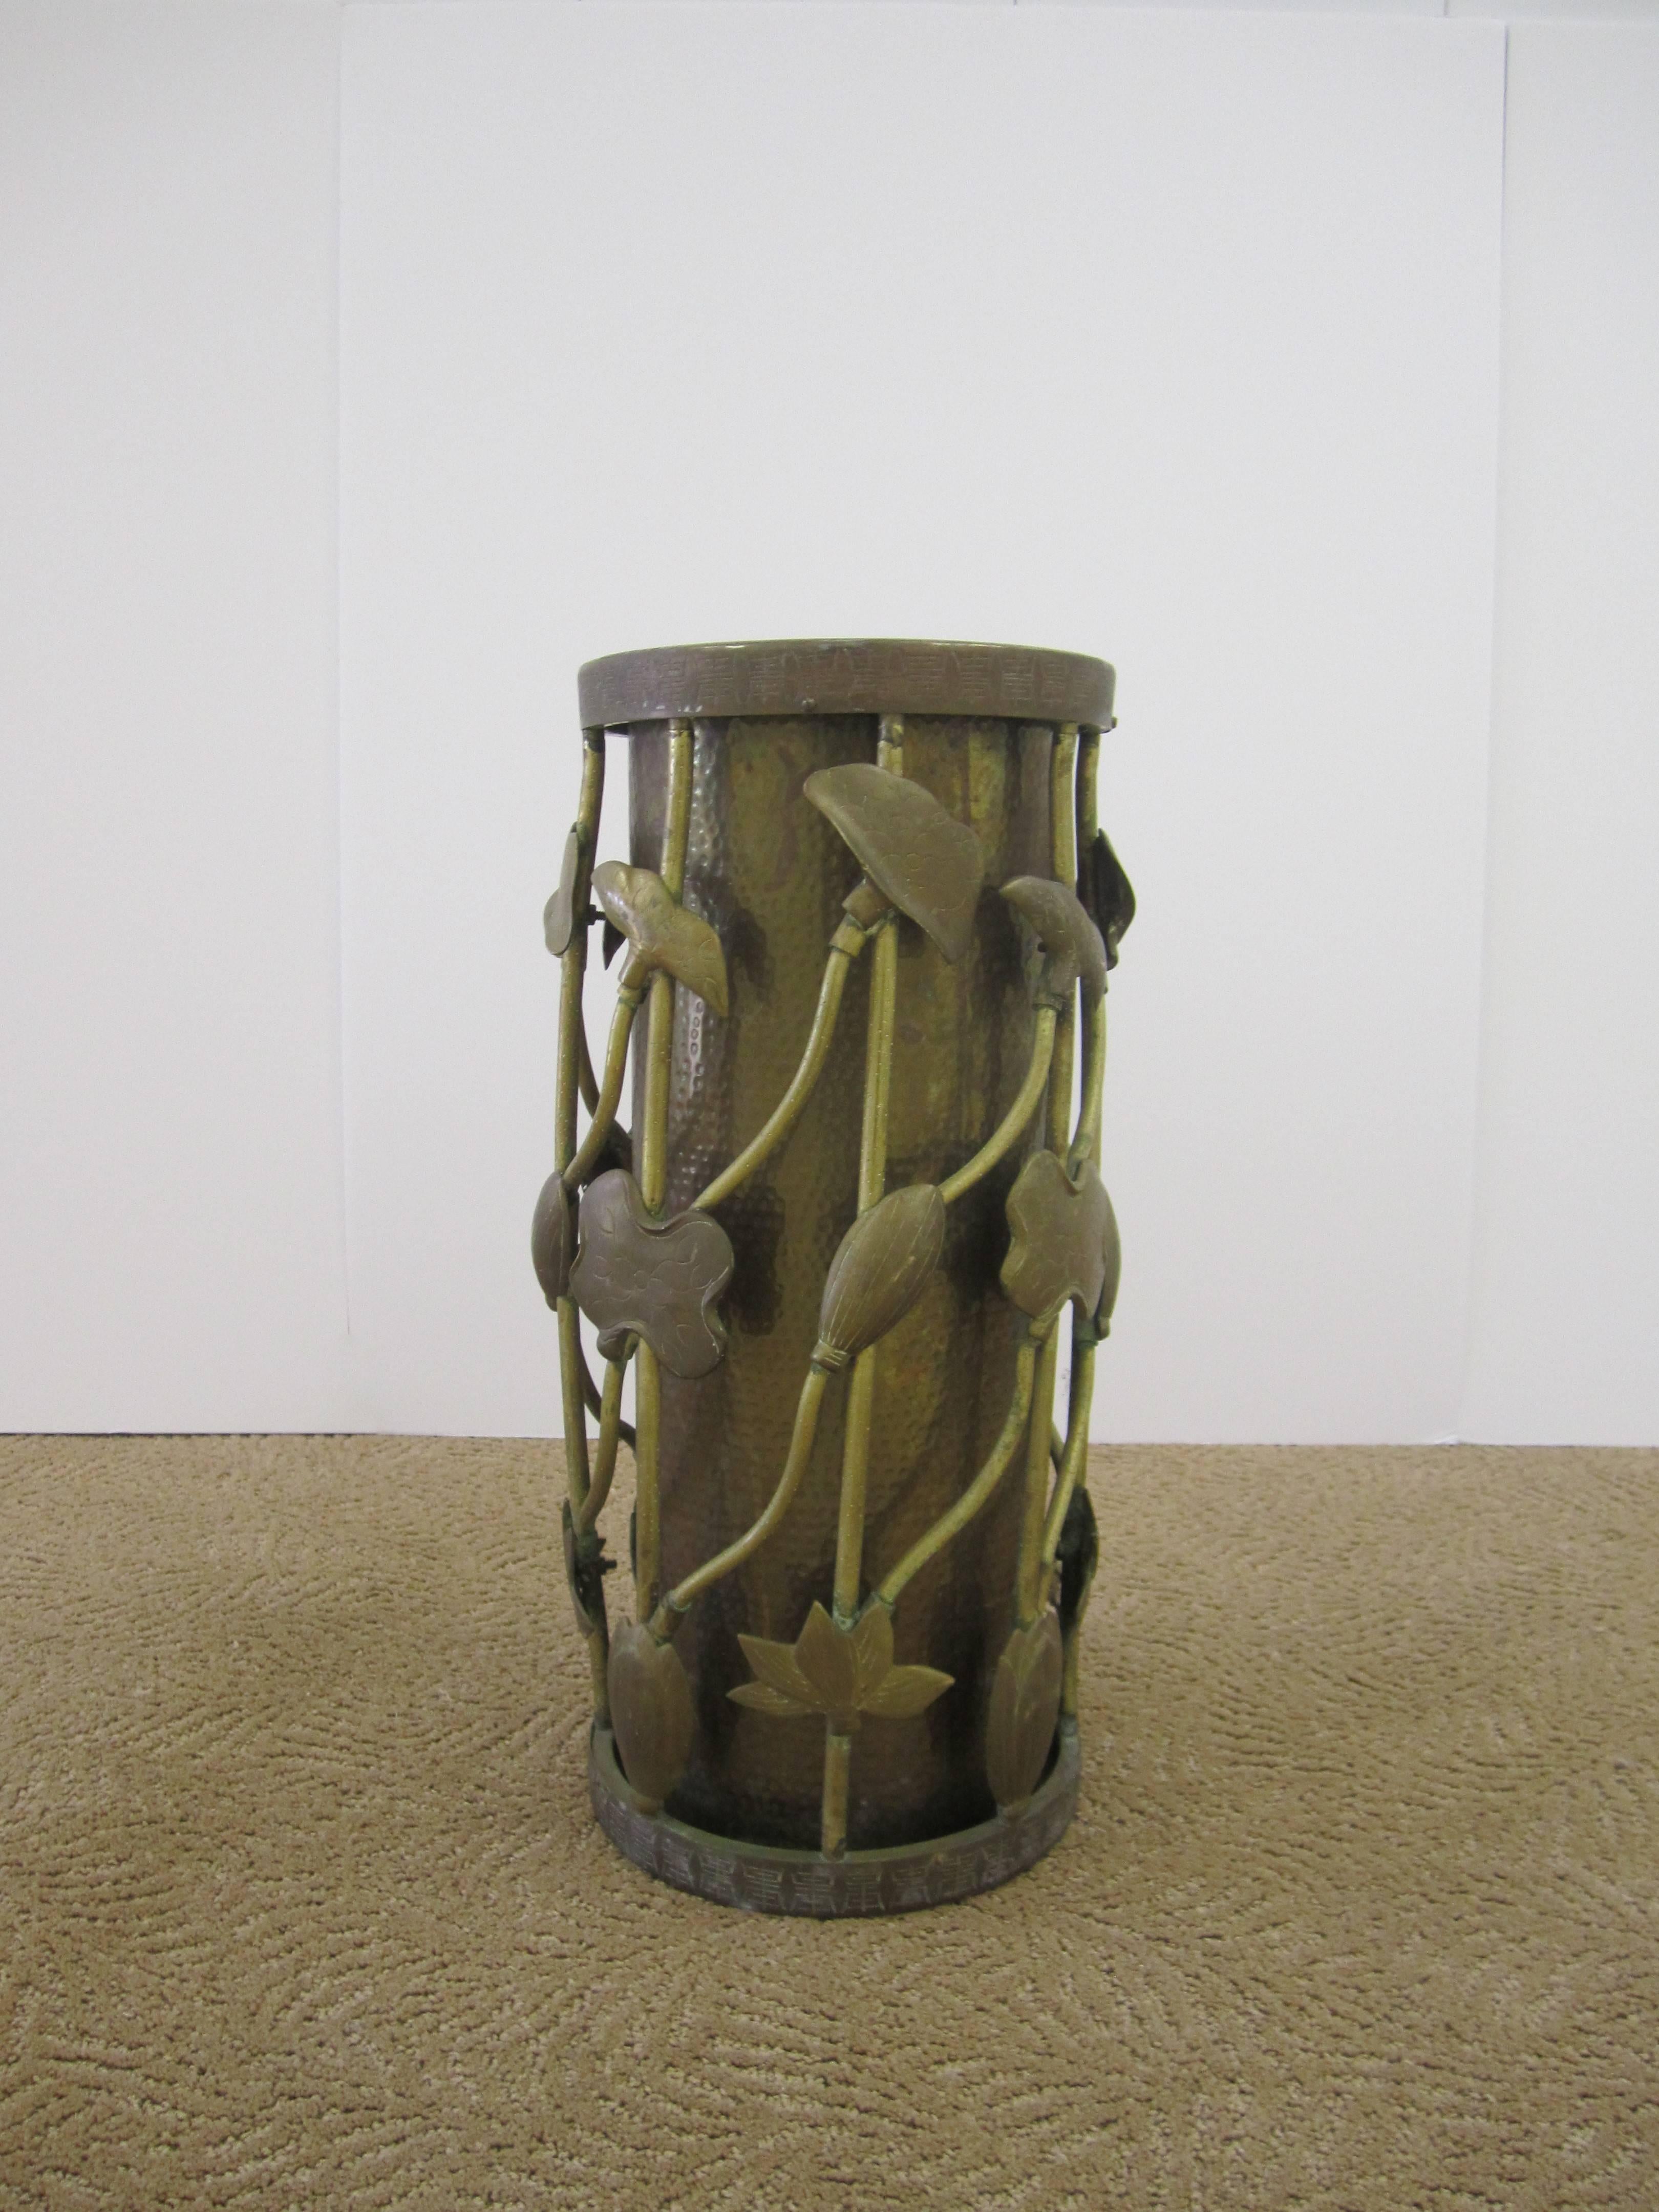 A beautiful mid-20th century brass umbrella stand with Lotus leaf, flower, and vine design in the Art Nouveau or Organic Modern style. Stand has a beautiful brass patina as show in images. With maker's mark on bottom as show in image #10. Ardalt was